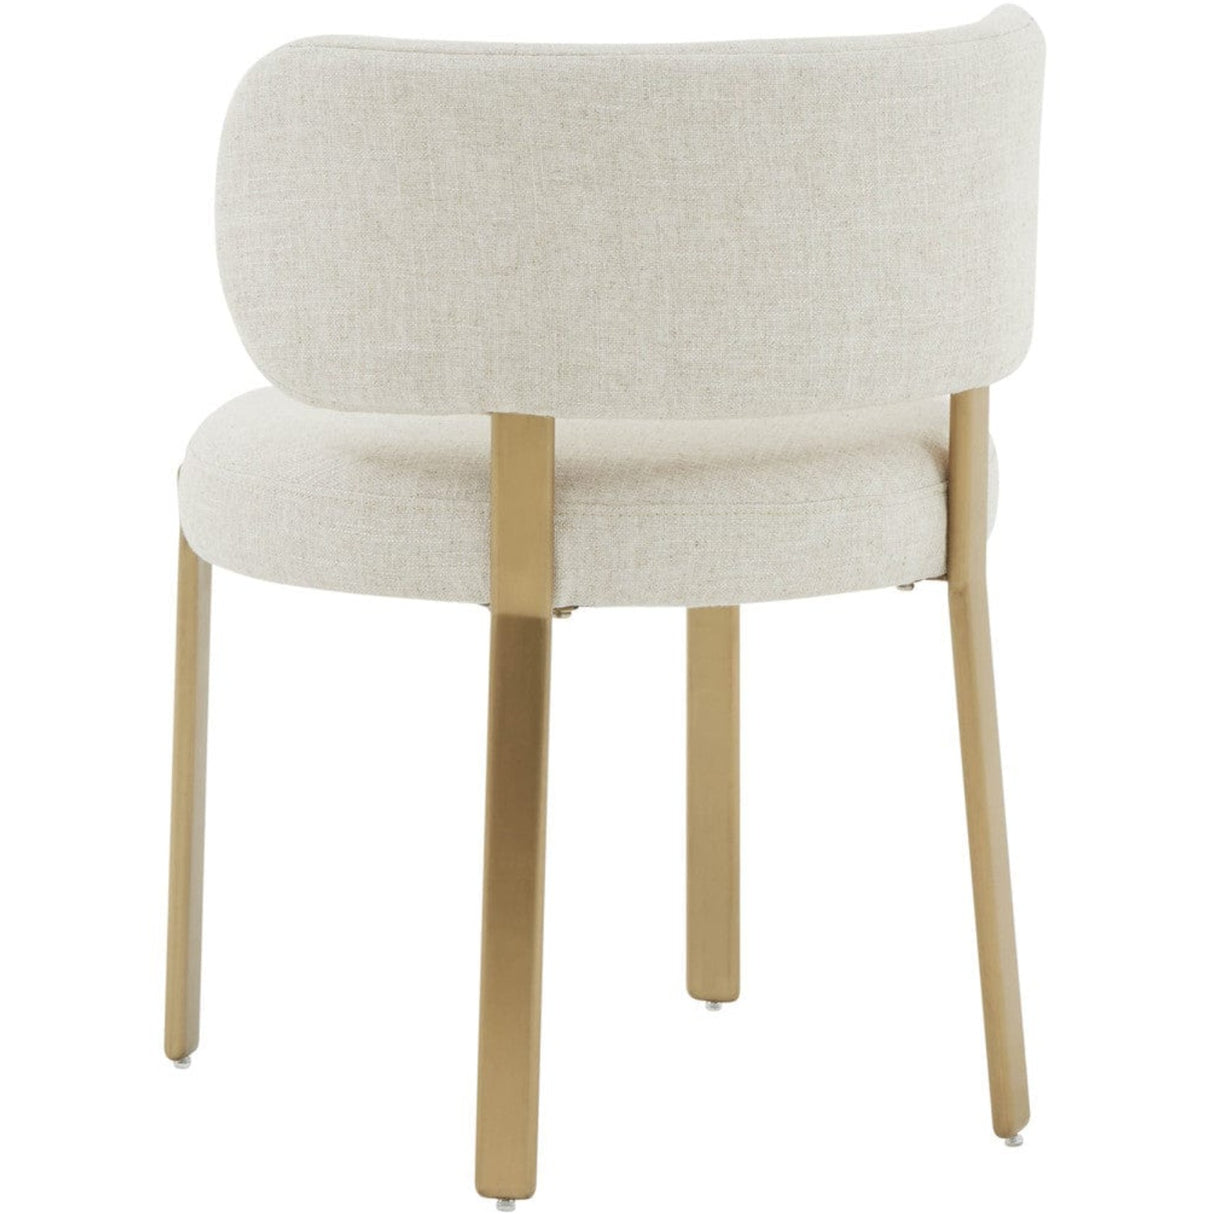 Candelabra Home Margaret Cream Linen Dining Chair Curved Upholstered Dining Chair TOV-D68650